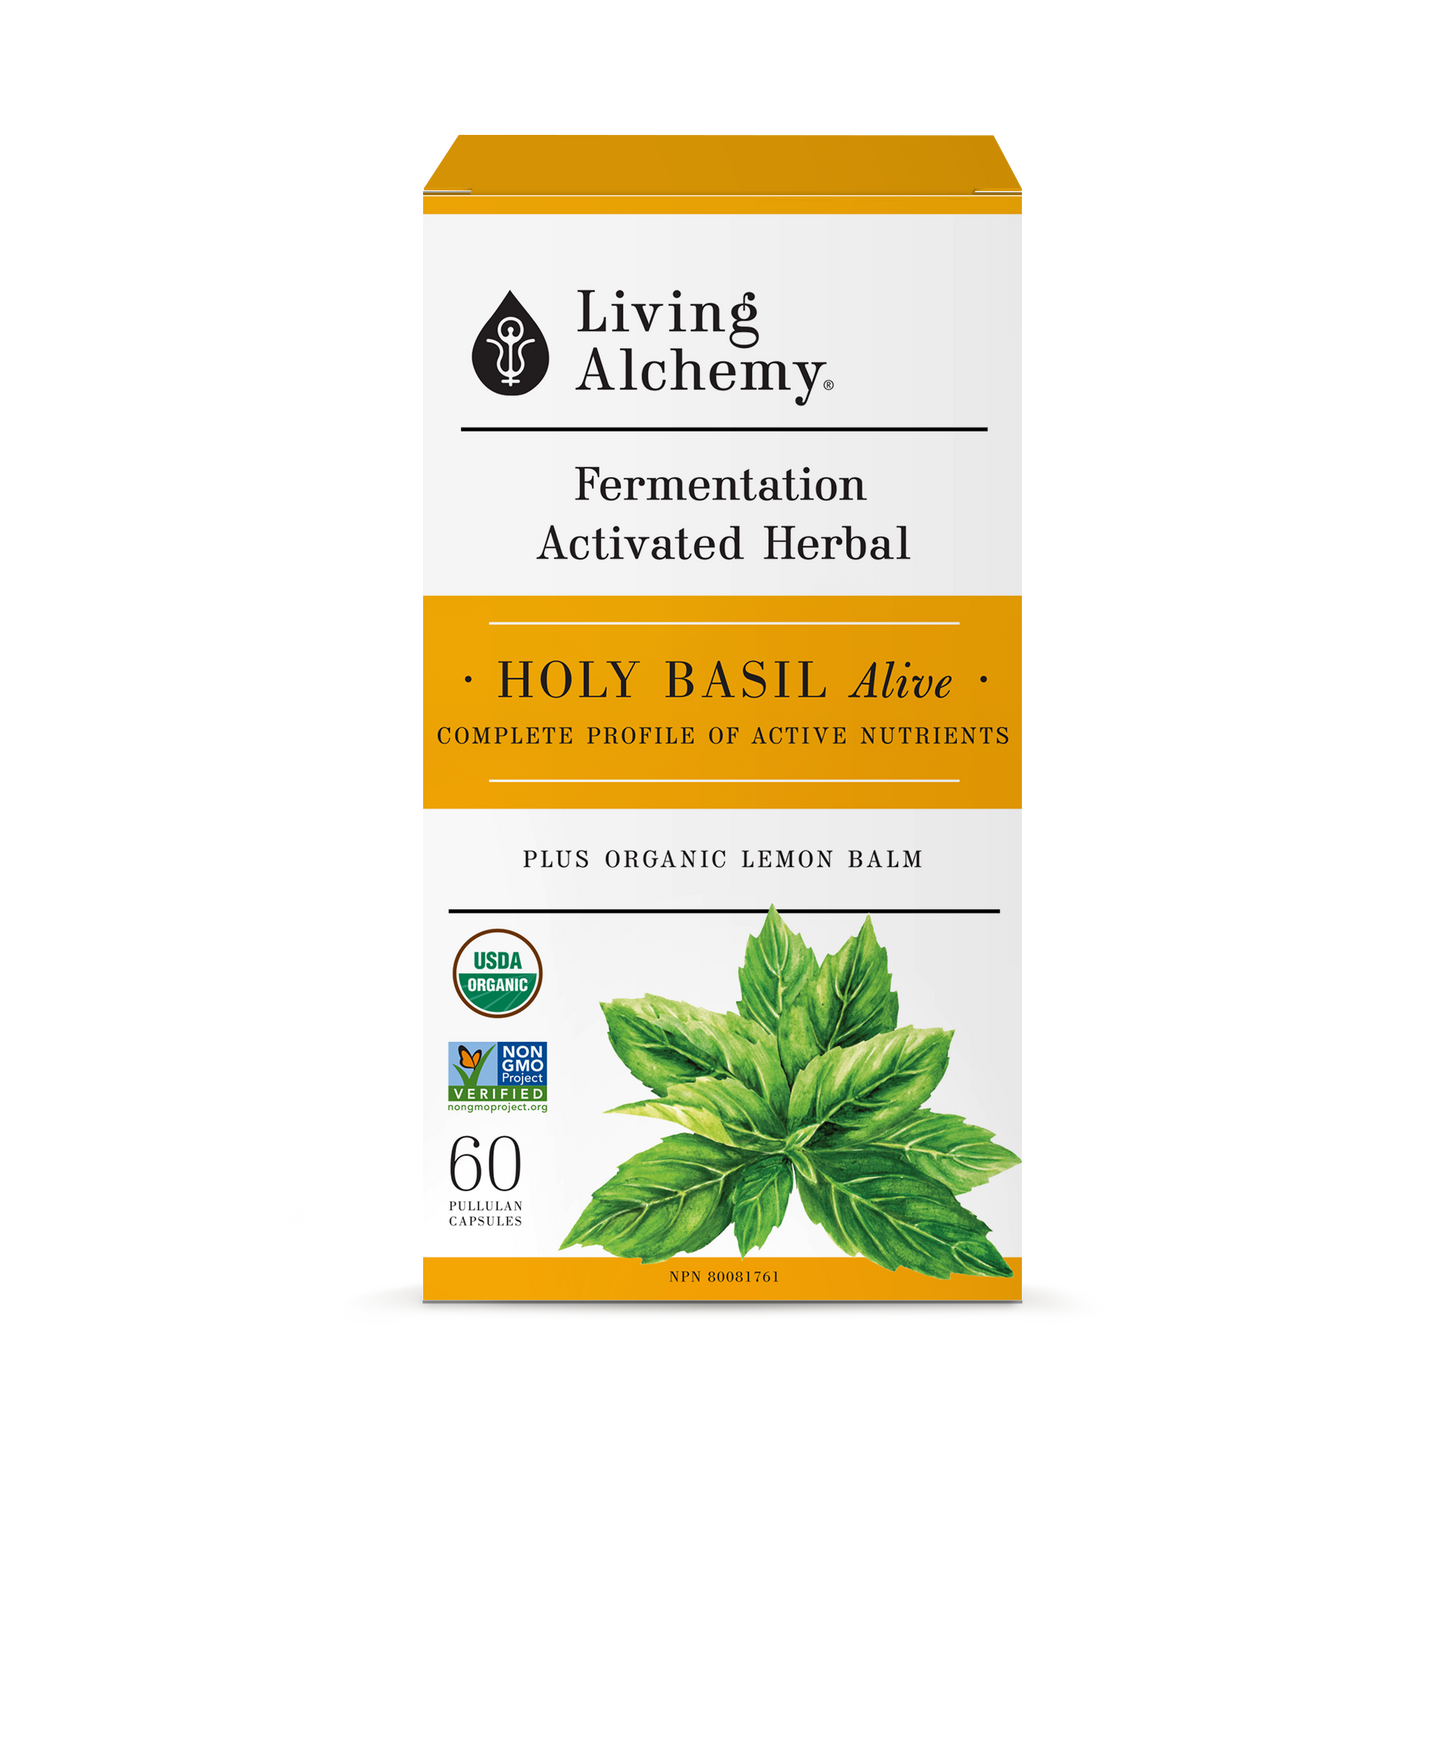 Your Flora: HOLY BASIL ALIVE by Living Alchemy